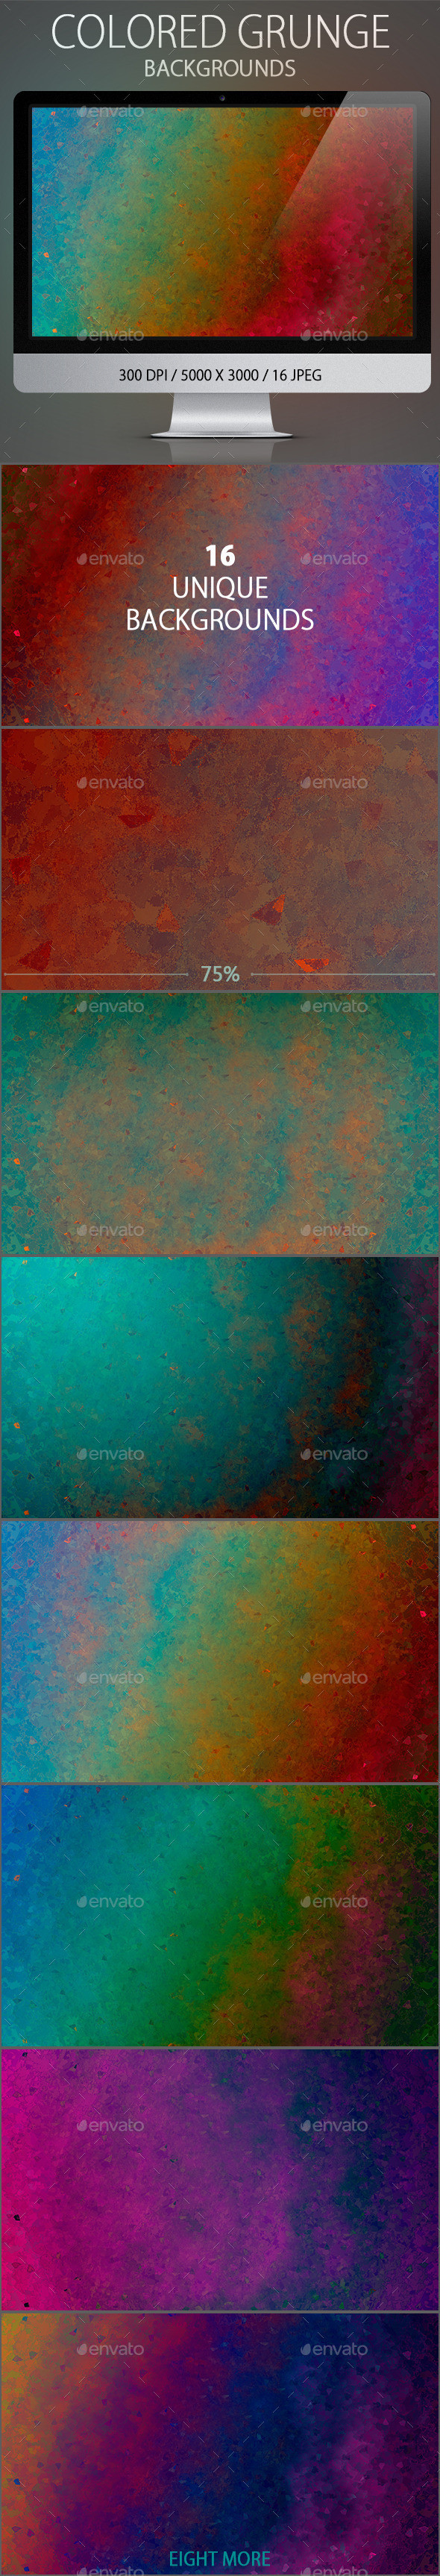 Title colored grunge backgrounds